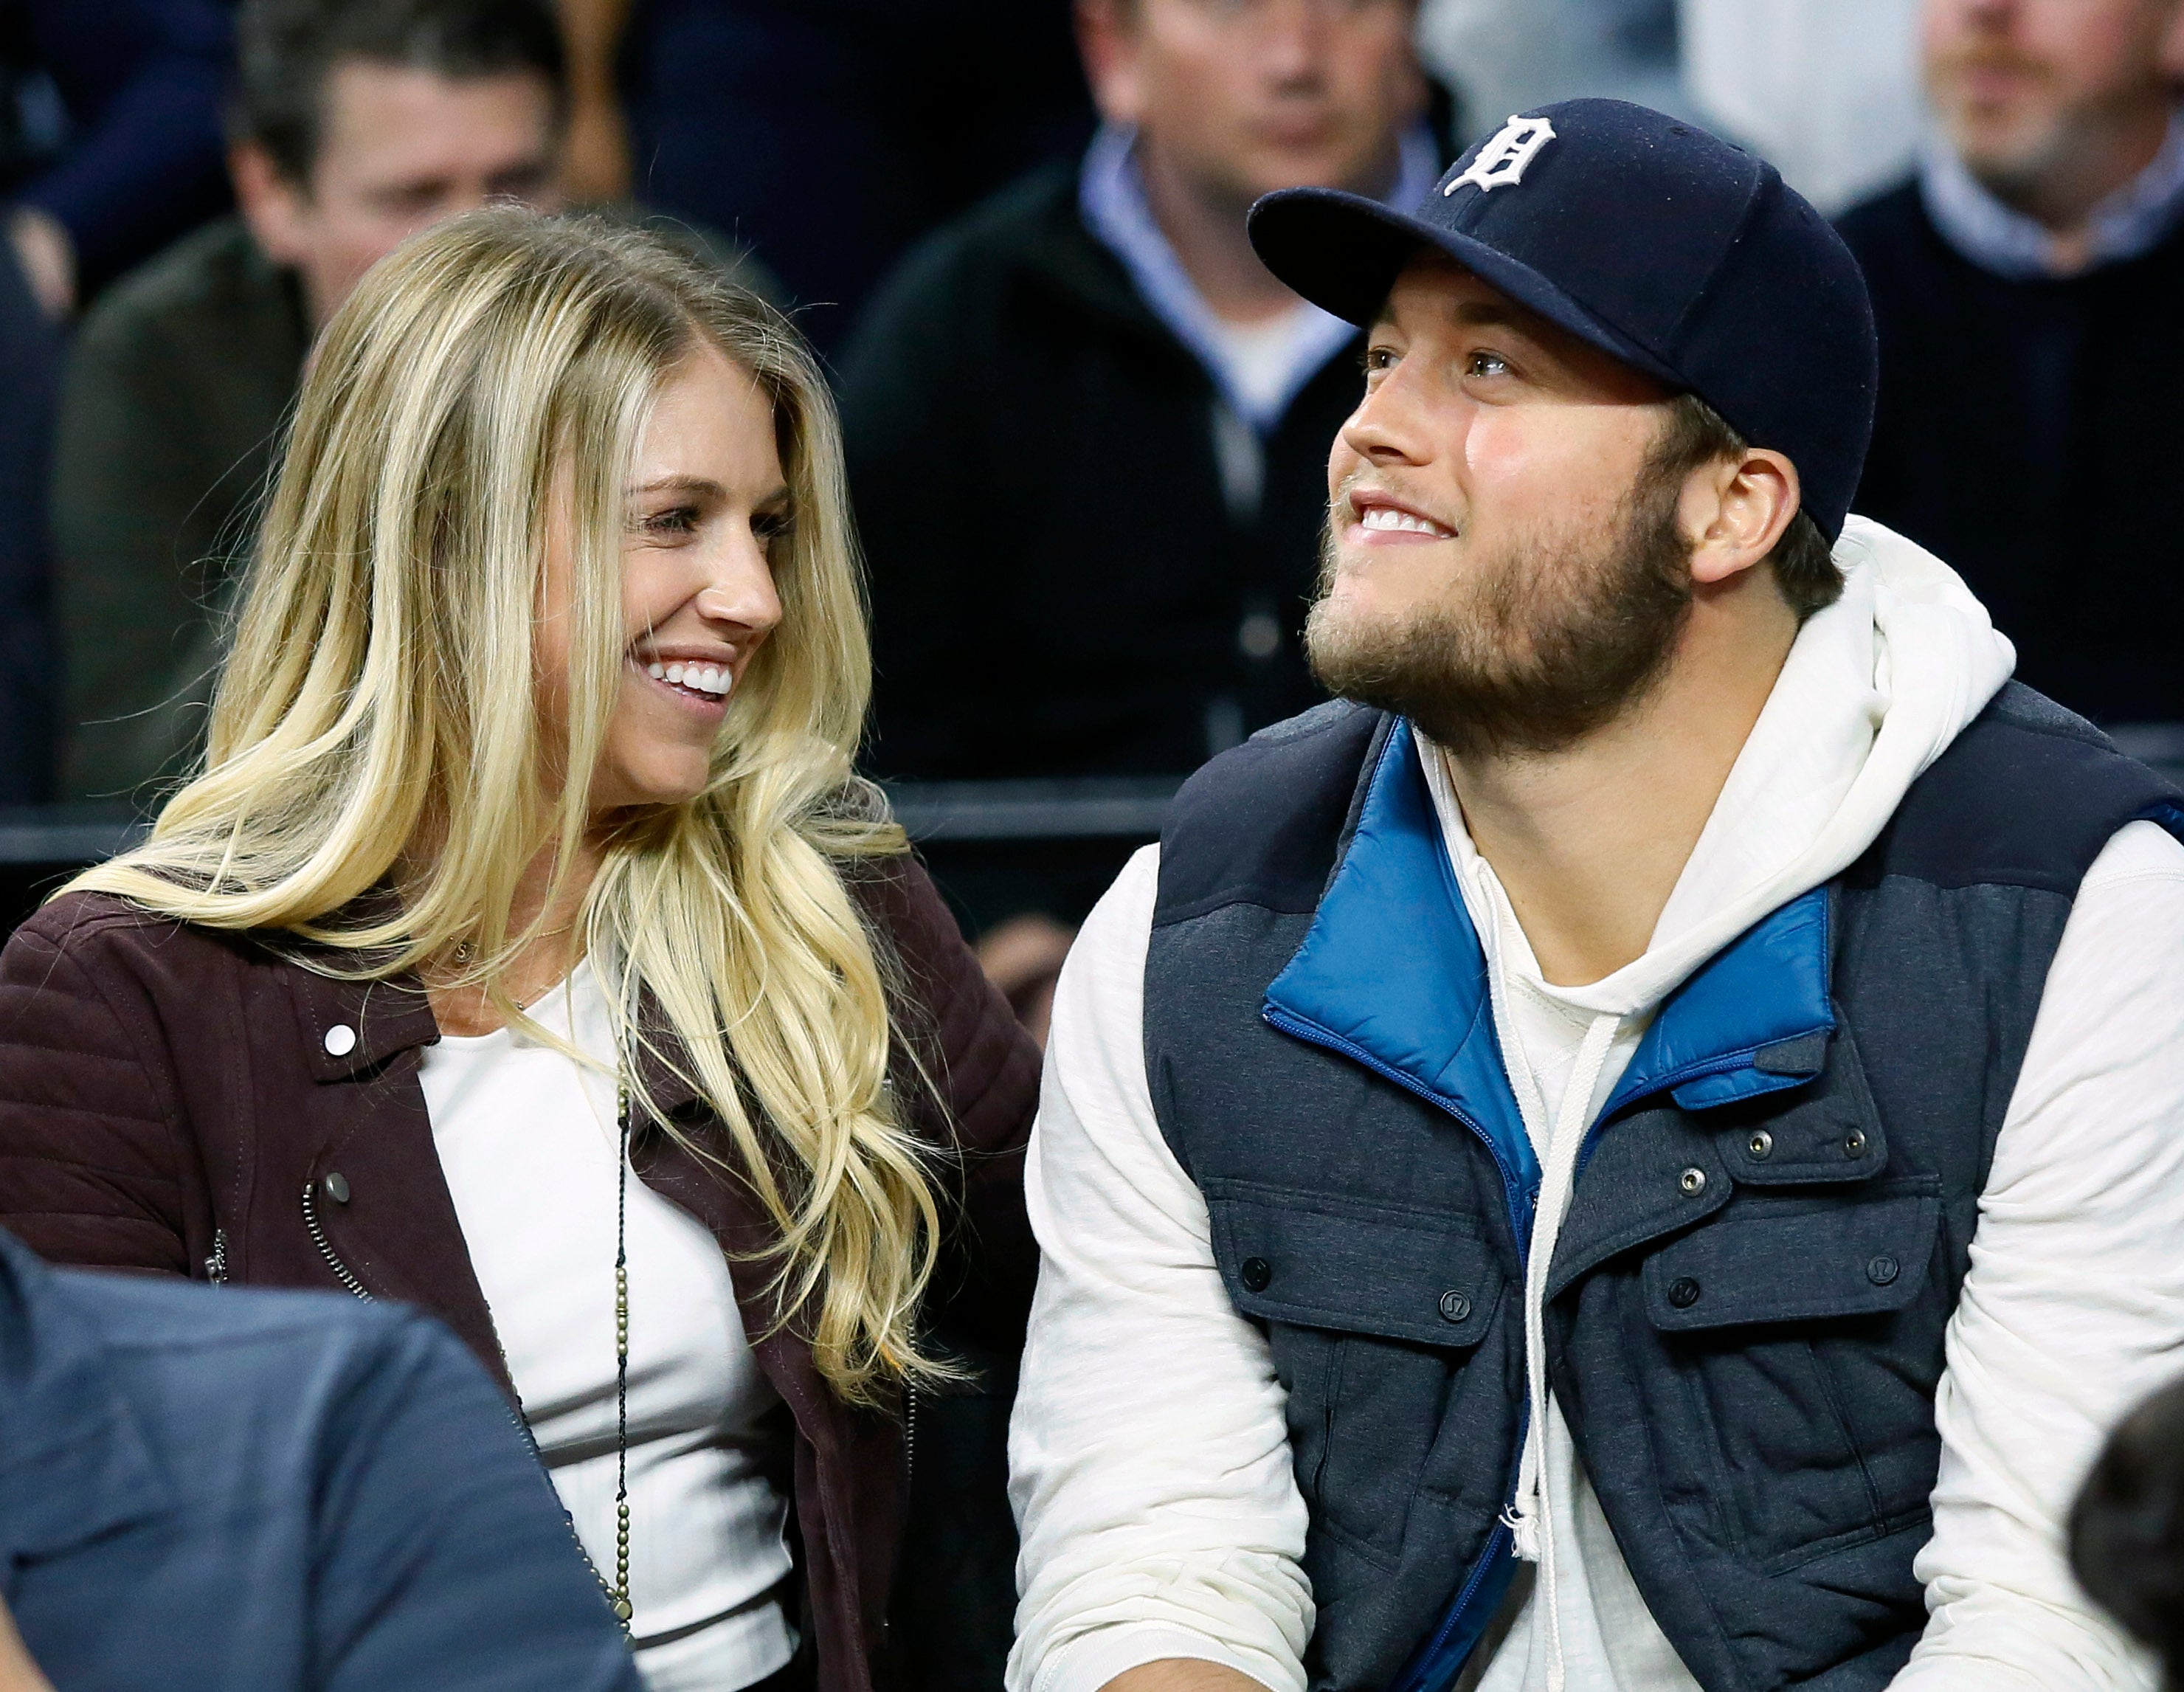 Matthew Stafford’s wife Kelly reacts to the sheep trade report